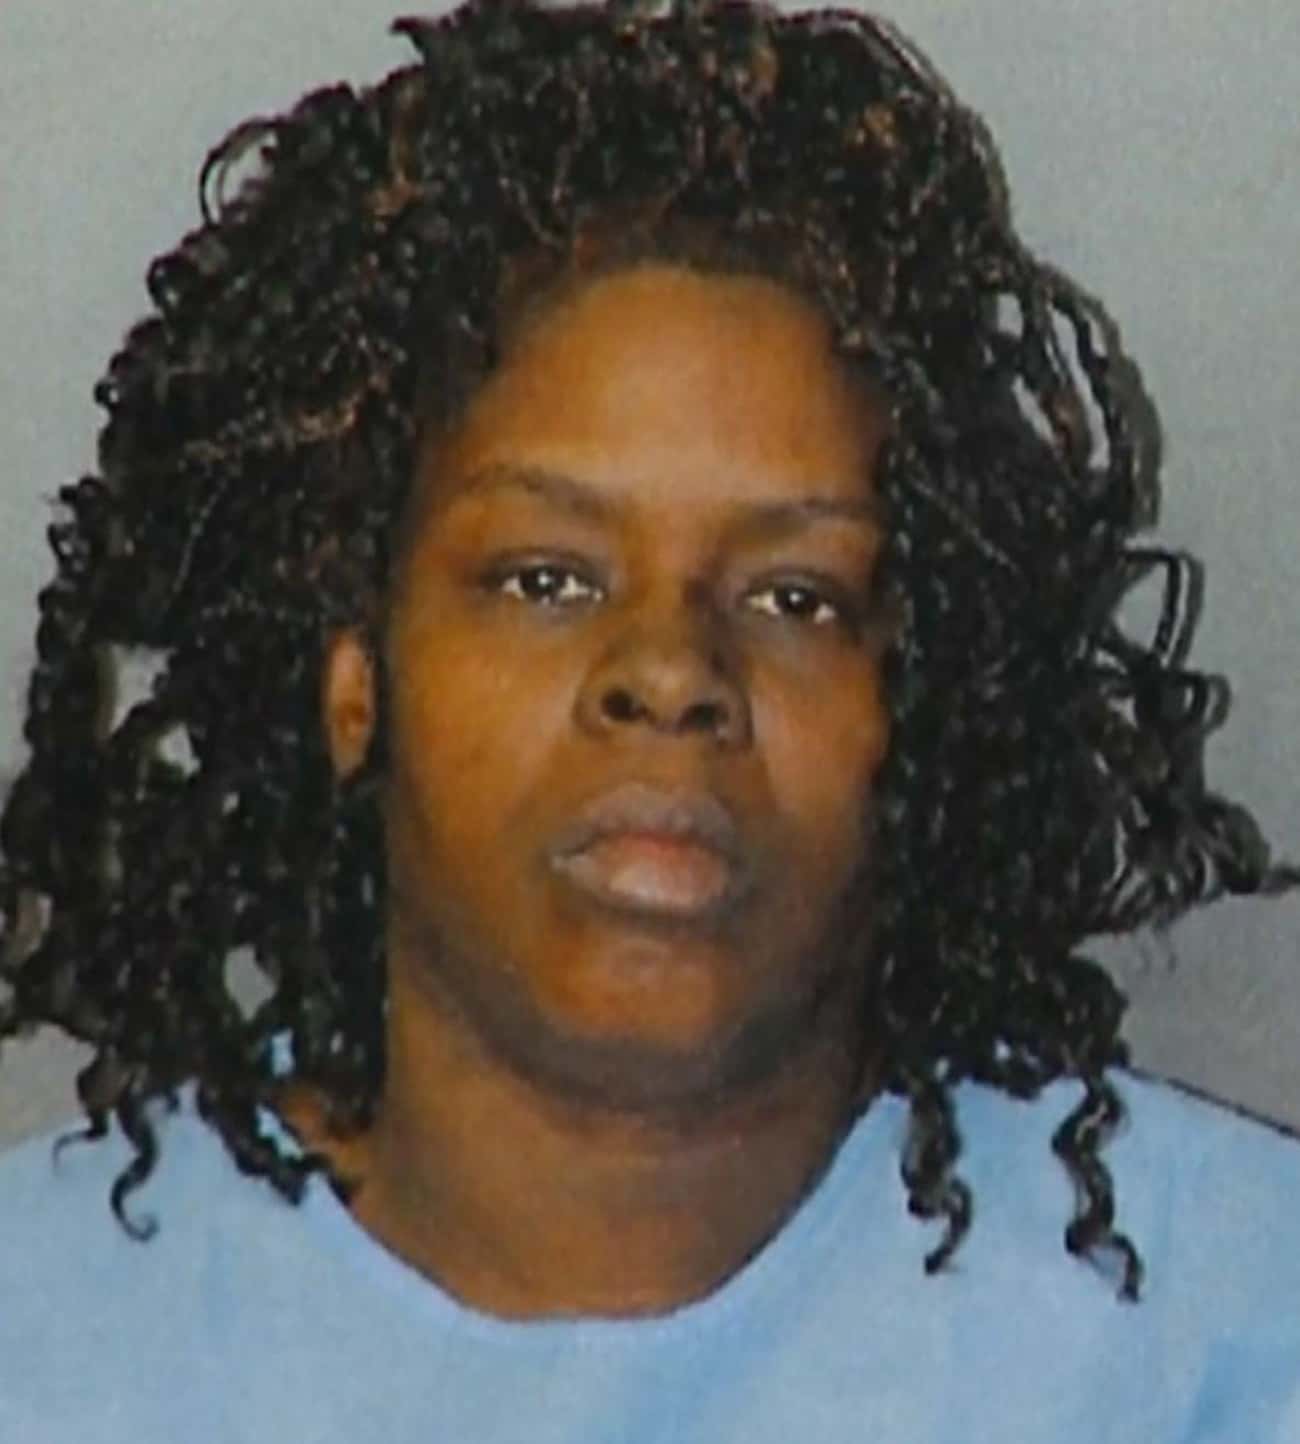 Mom Stabs Two Children In Voodoo Ritual Gone Wrong